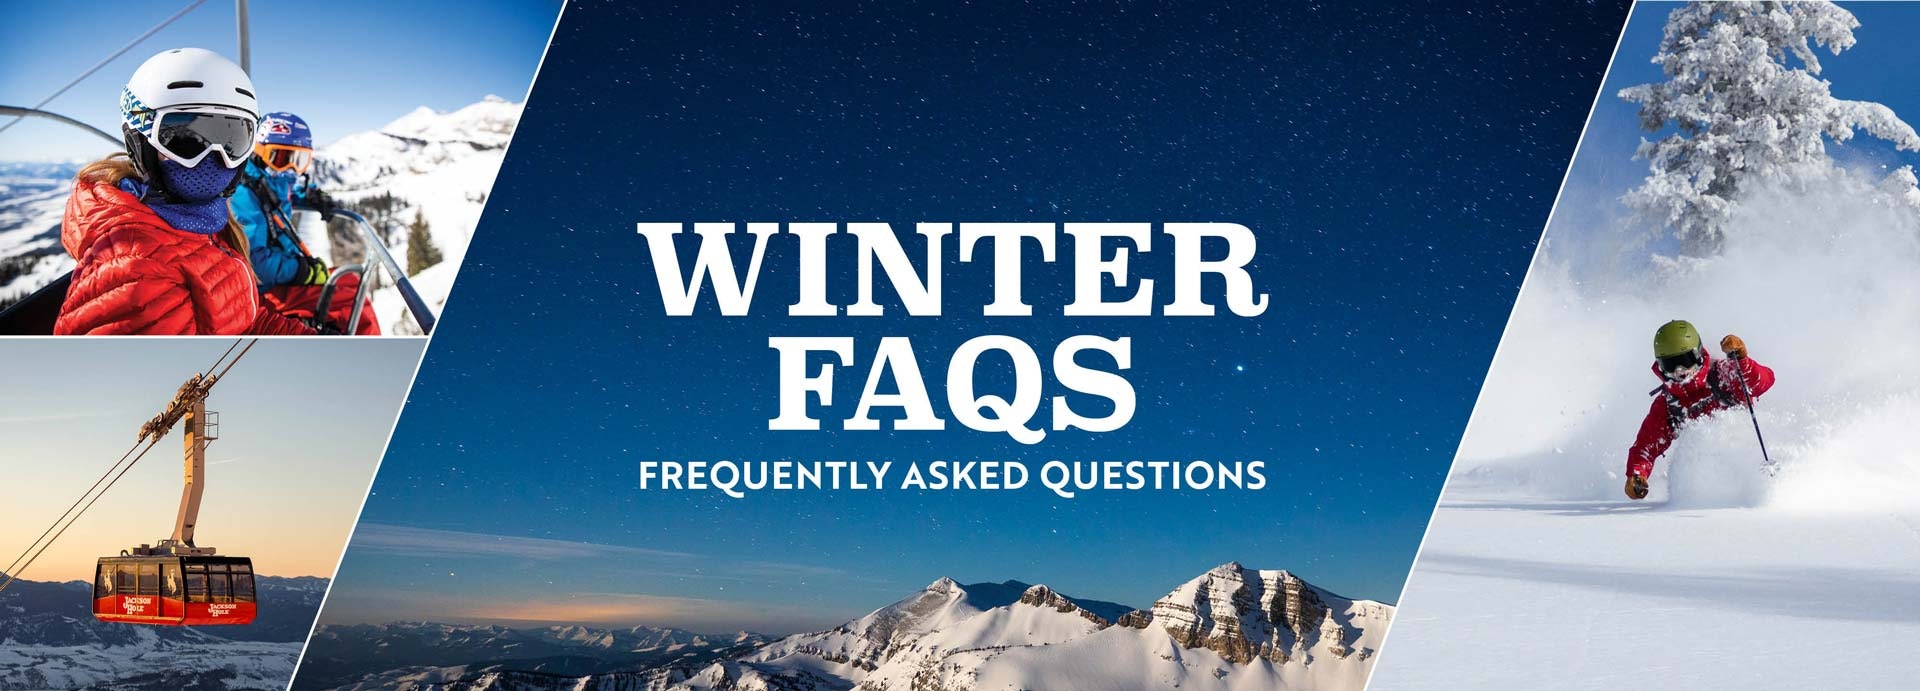 Branded creative for winter faqs